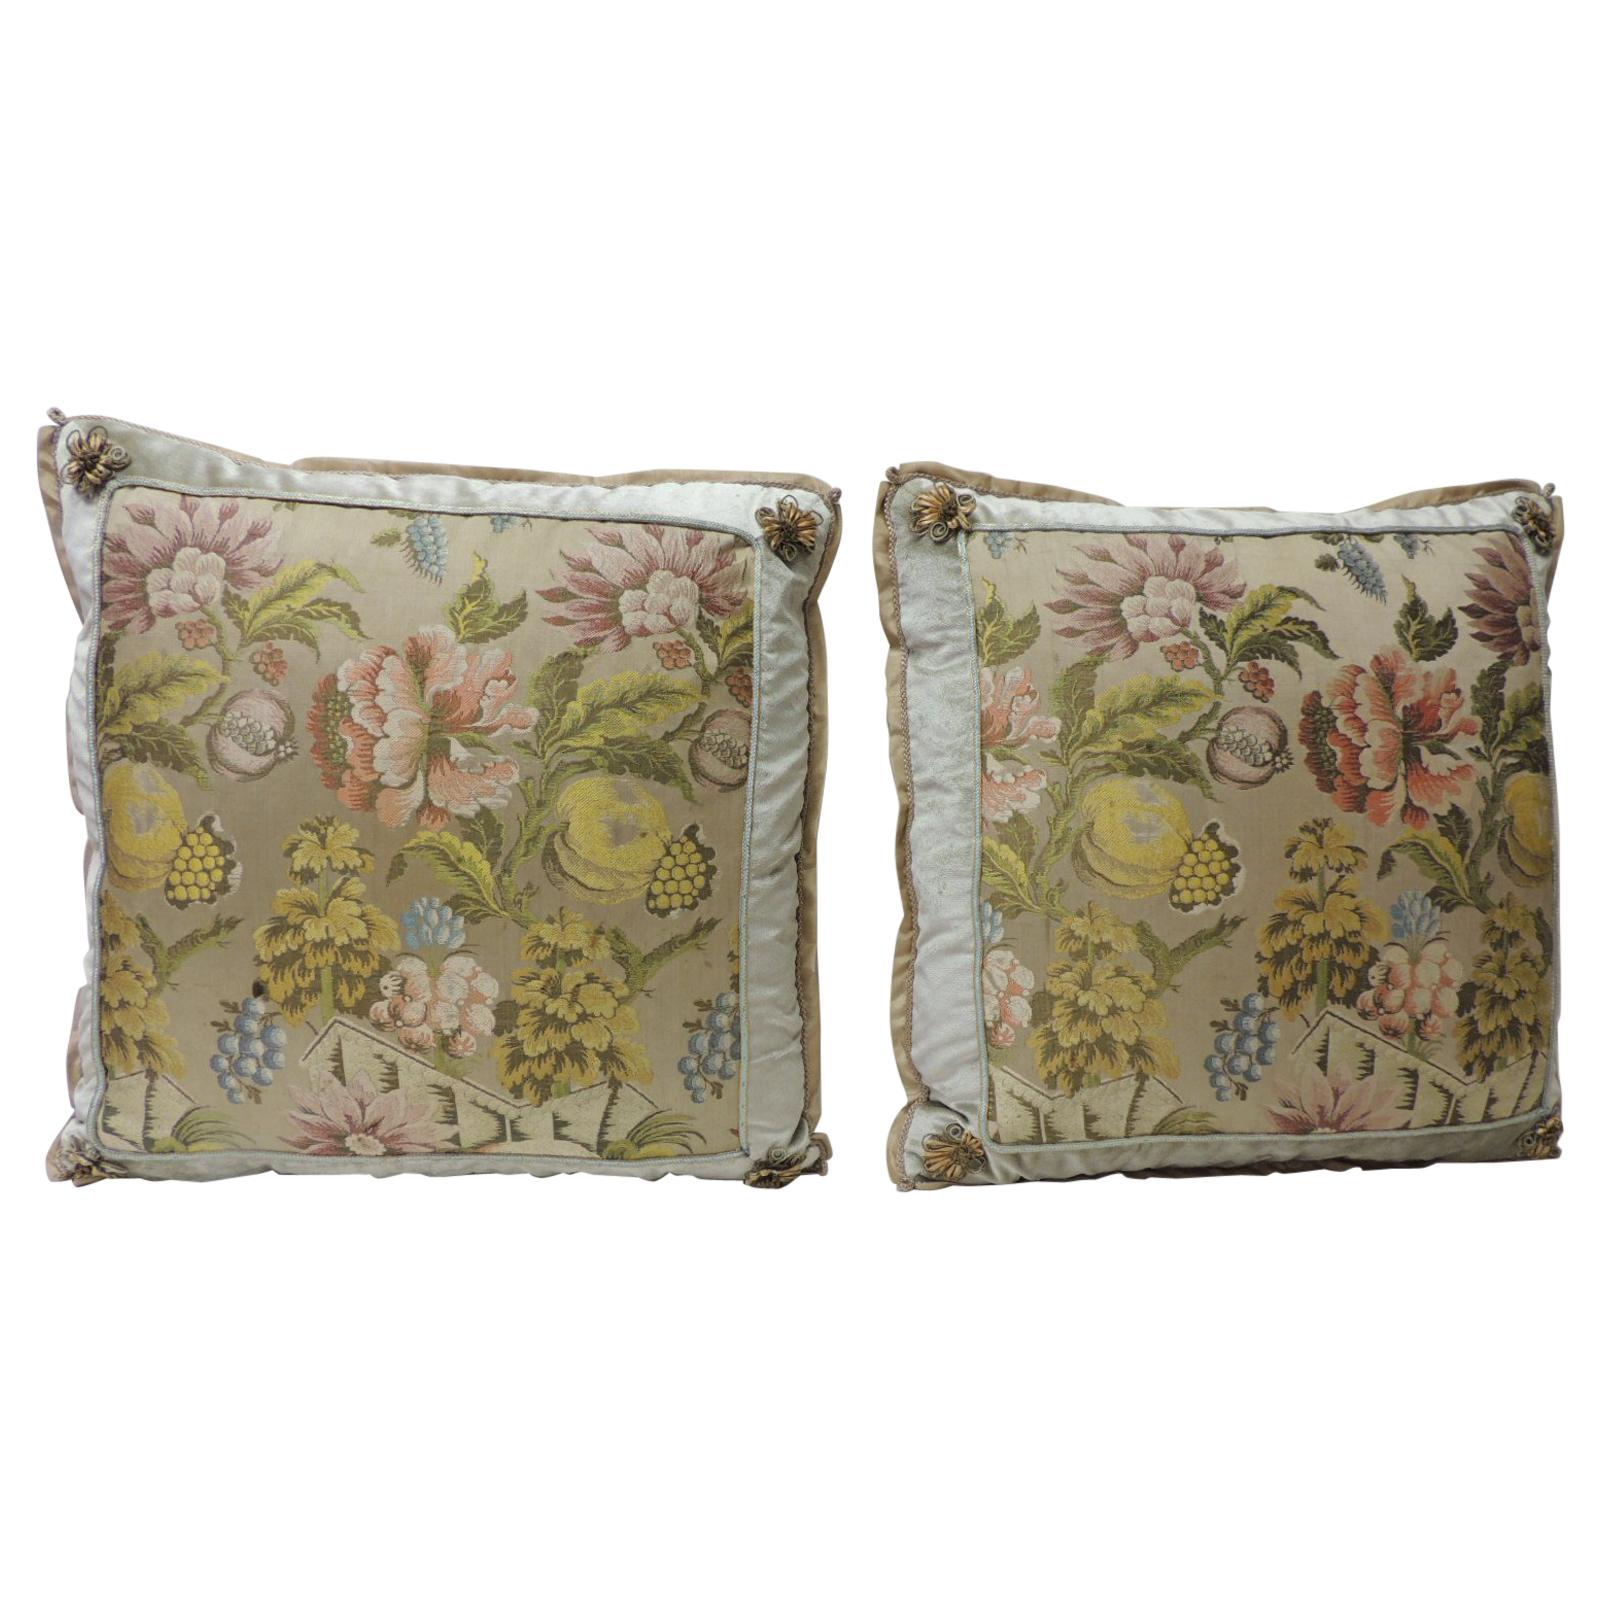 Pair of Green and Pink Antique French Brocade Floral Decorative Pillows For Sale